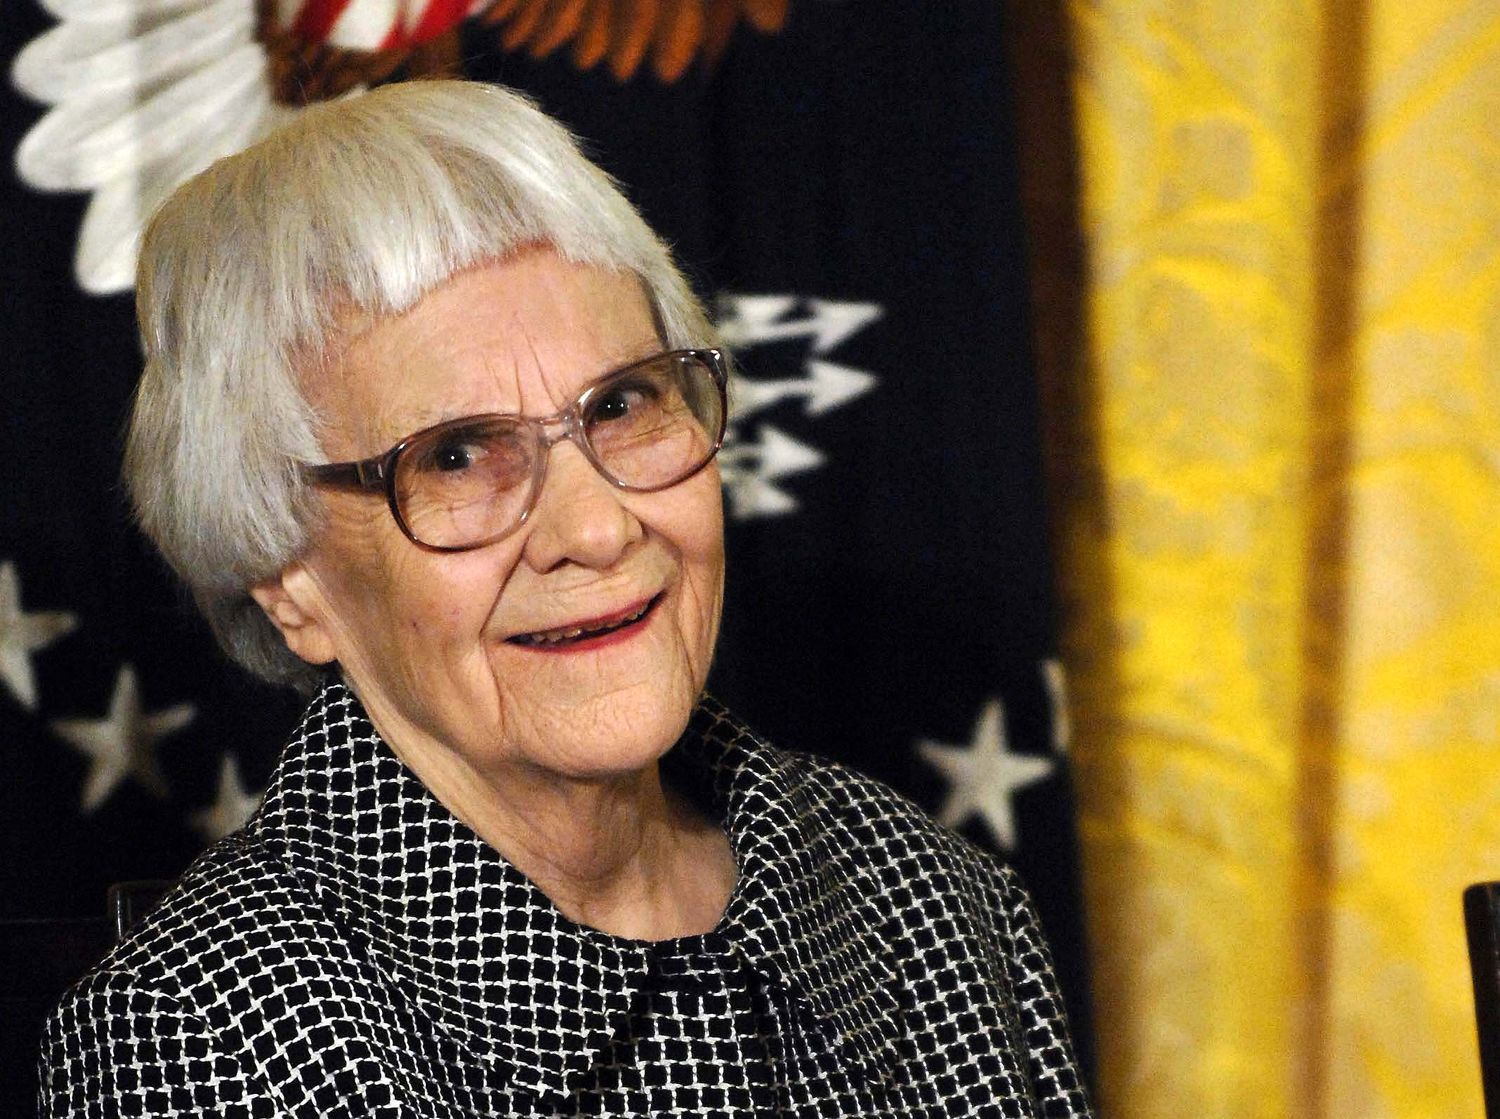 Harper Lee Biography Wikipedia author of To Kill a Mockingbird dead at age 89